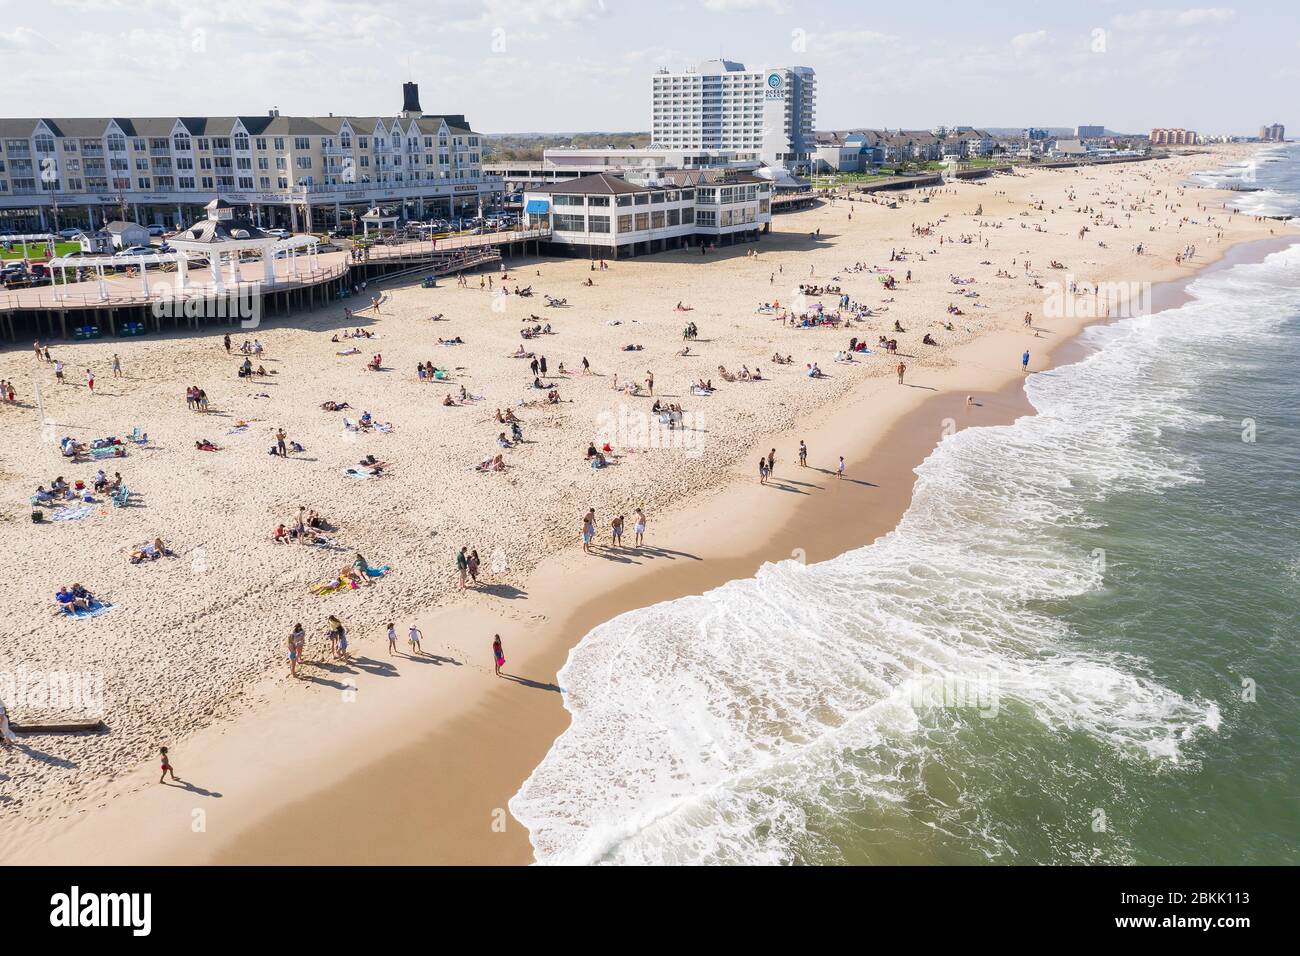 Aerial view of a crowded Jersey Shore beach in Long Branch, New